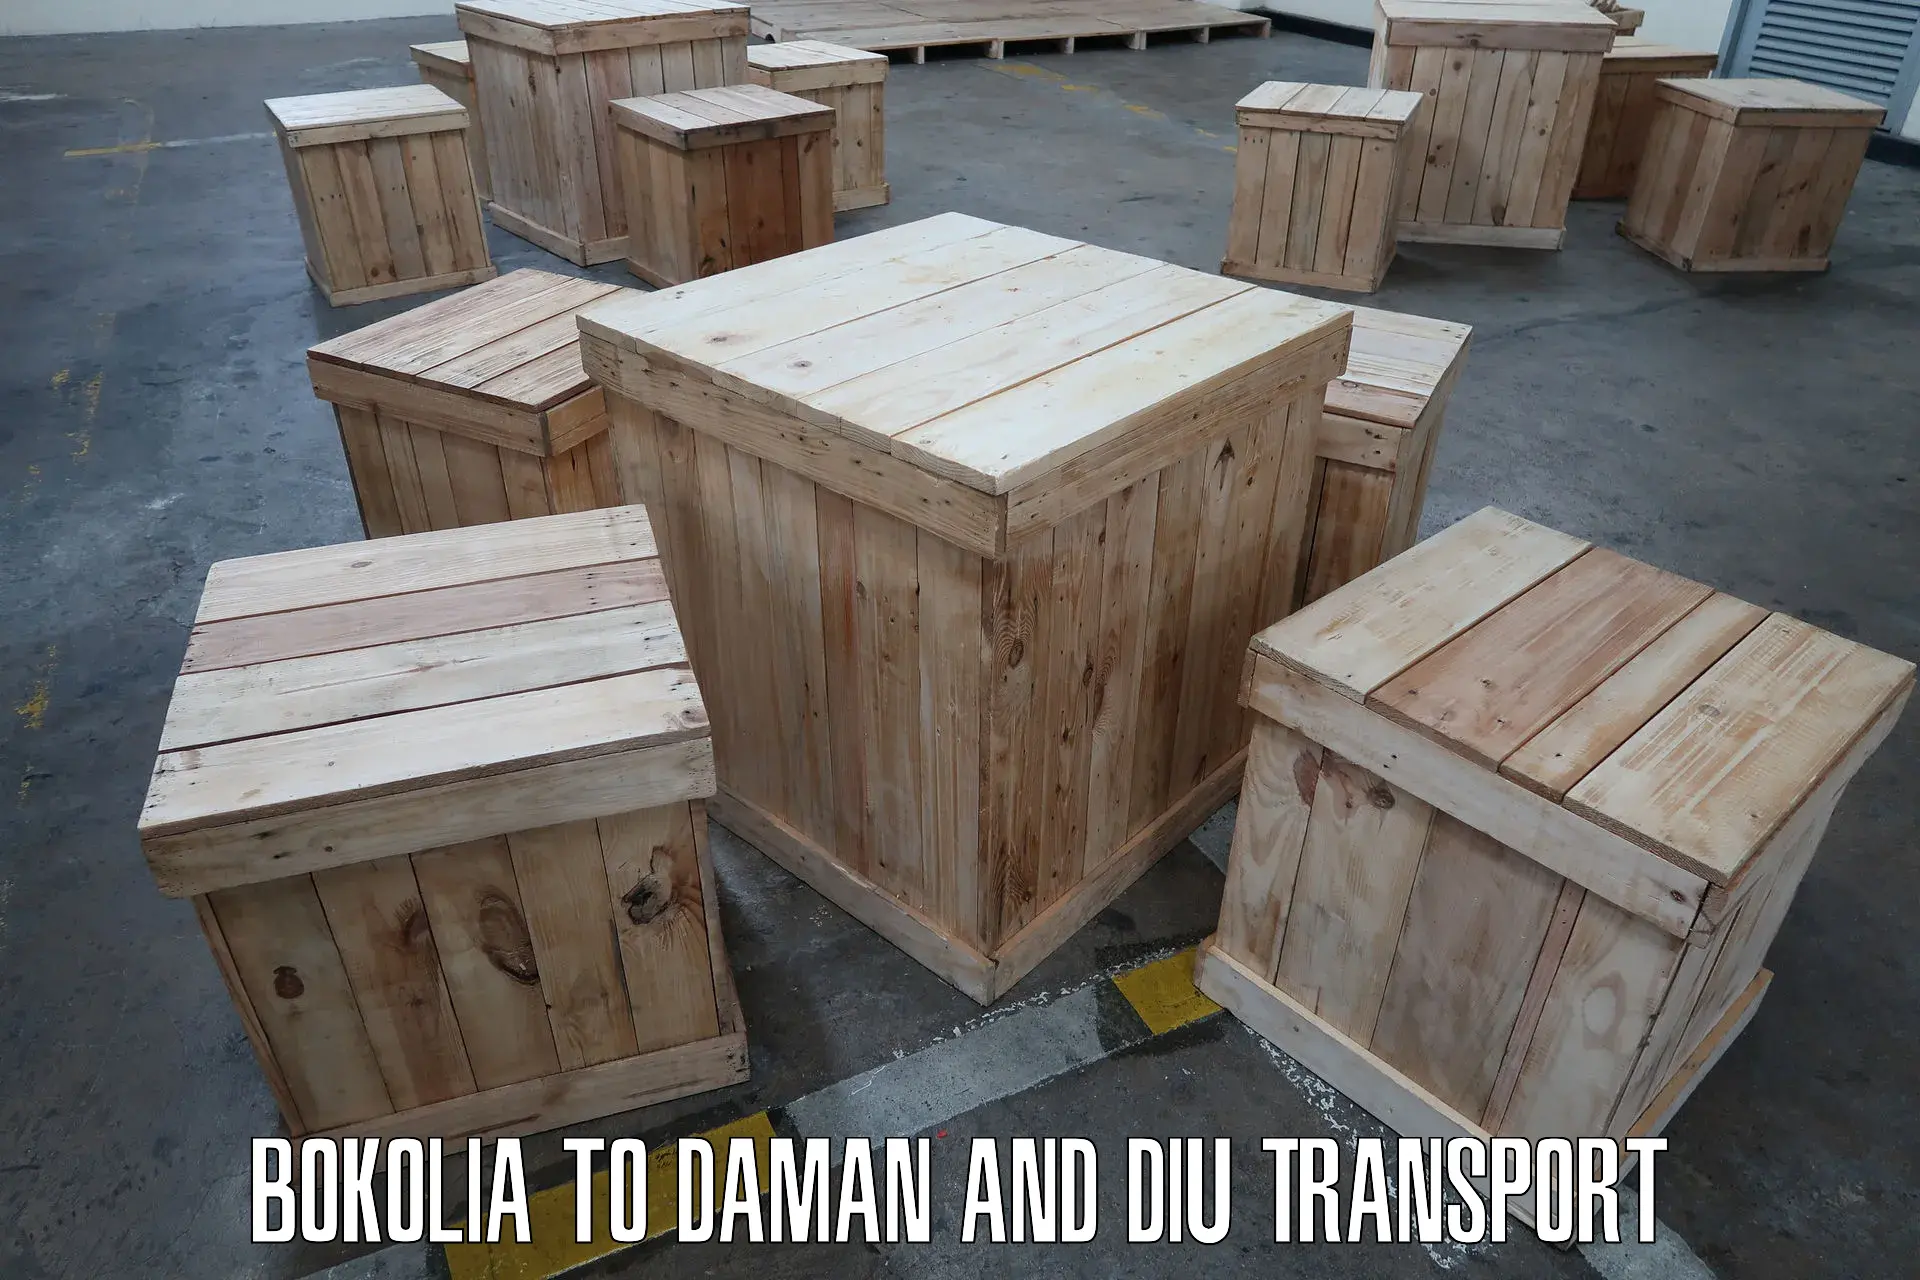 Transport shared services Bokolia to Daman